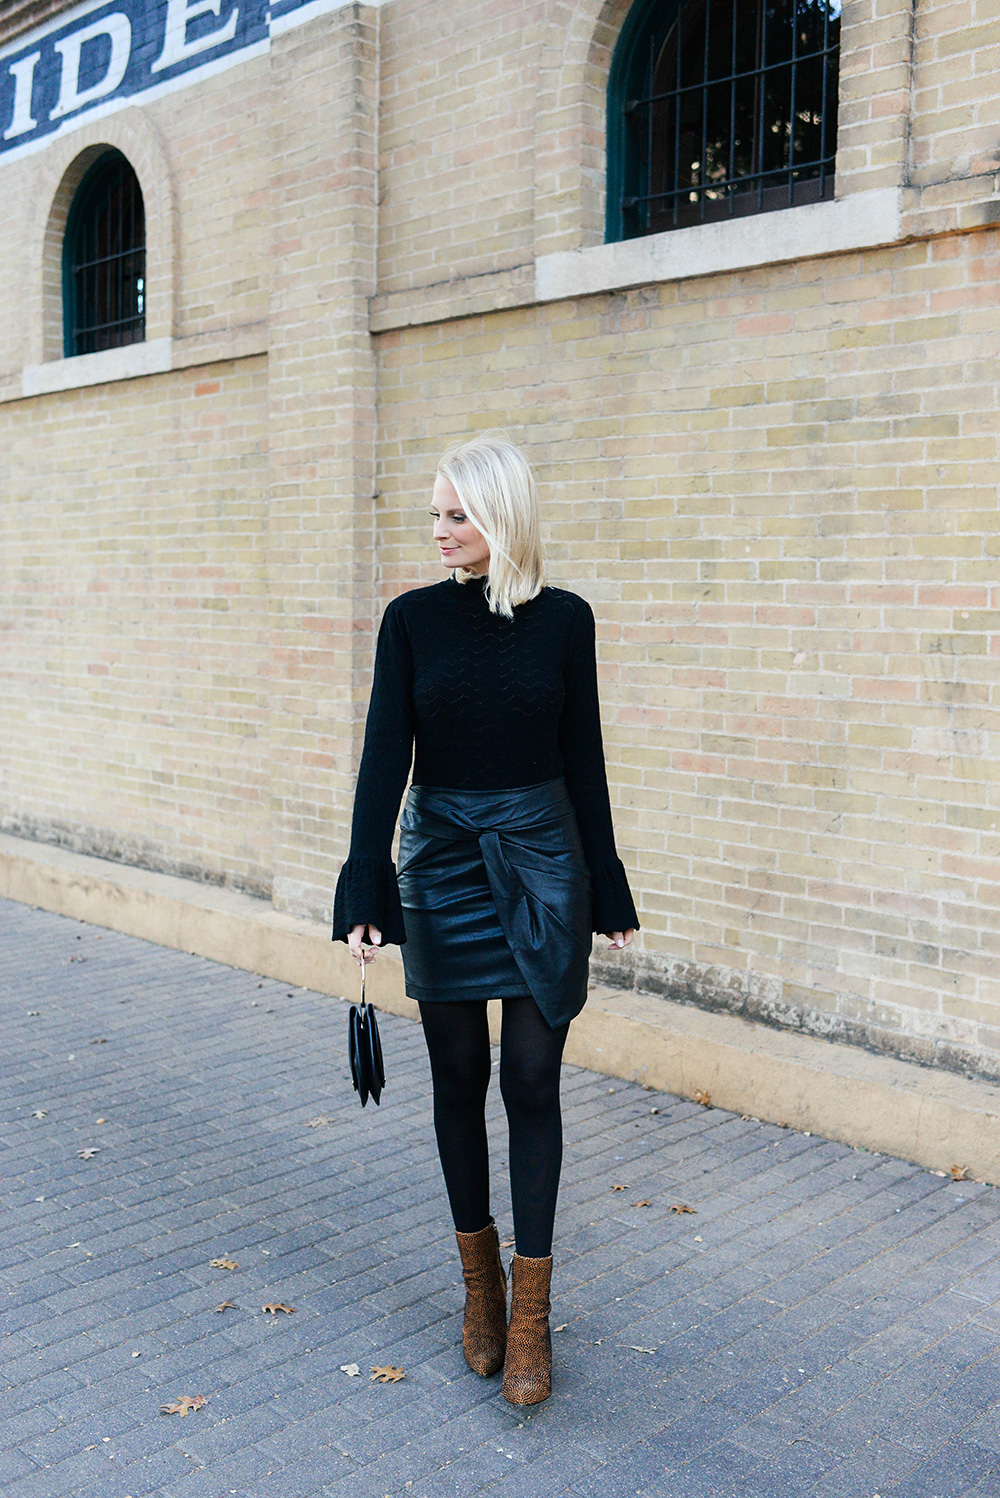 Knotted Leather Skirt | The Style Scribe